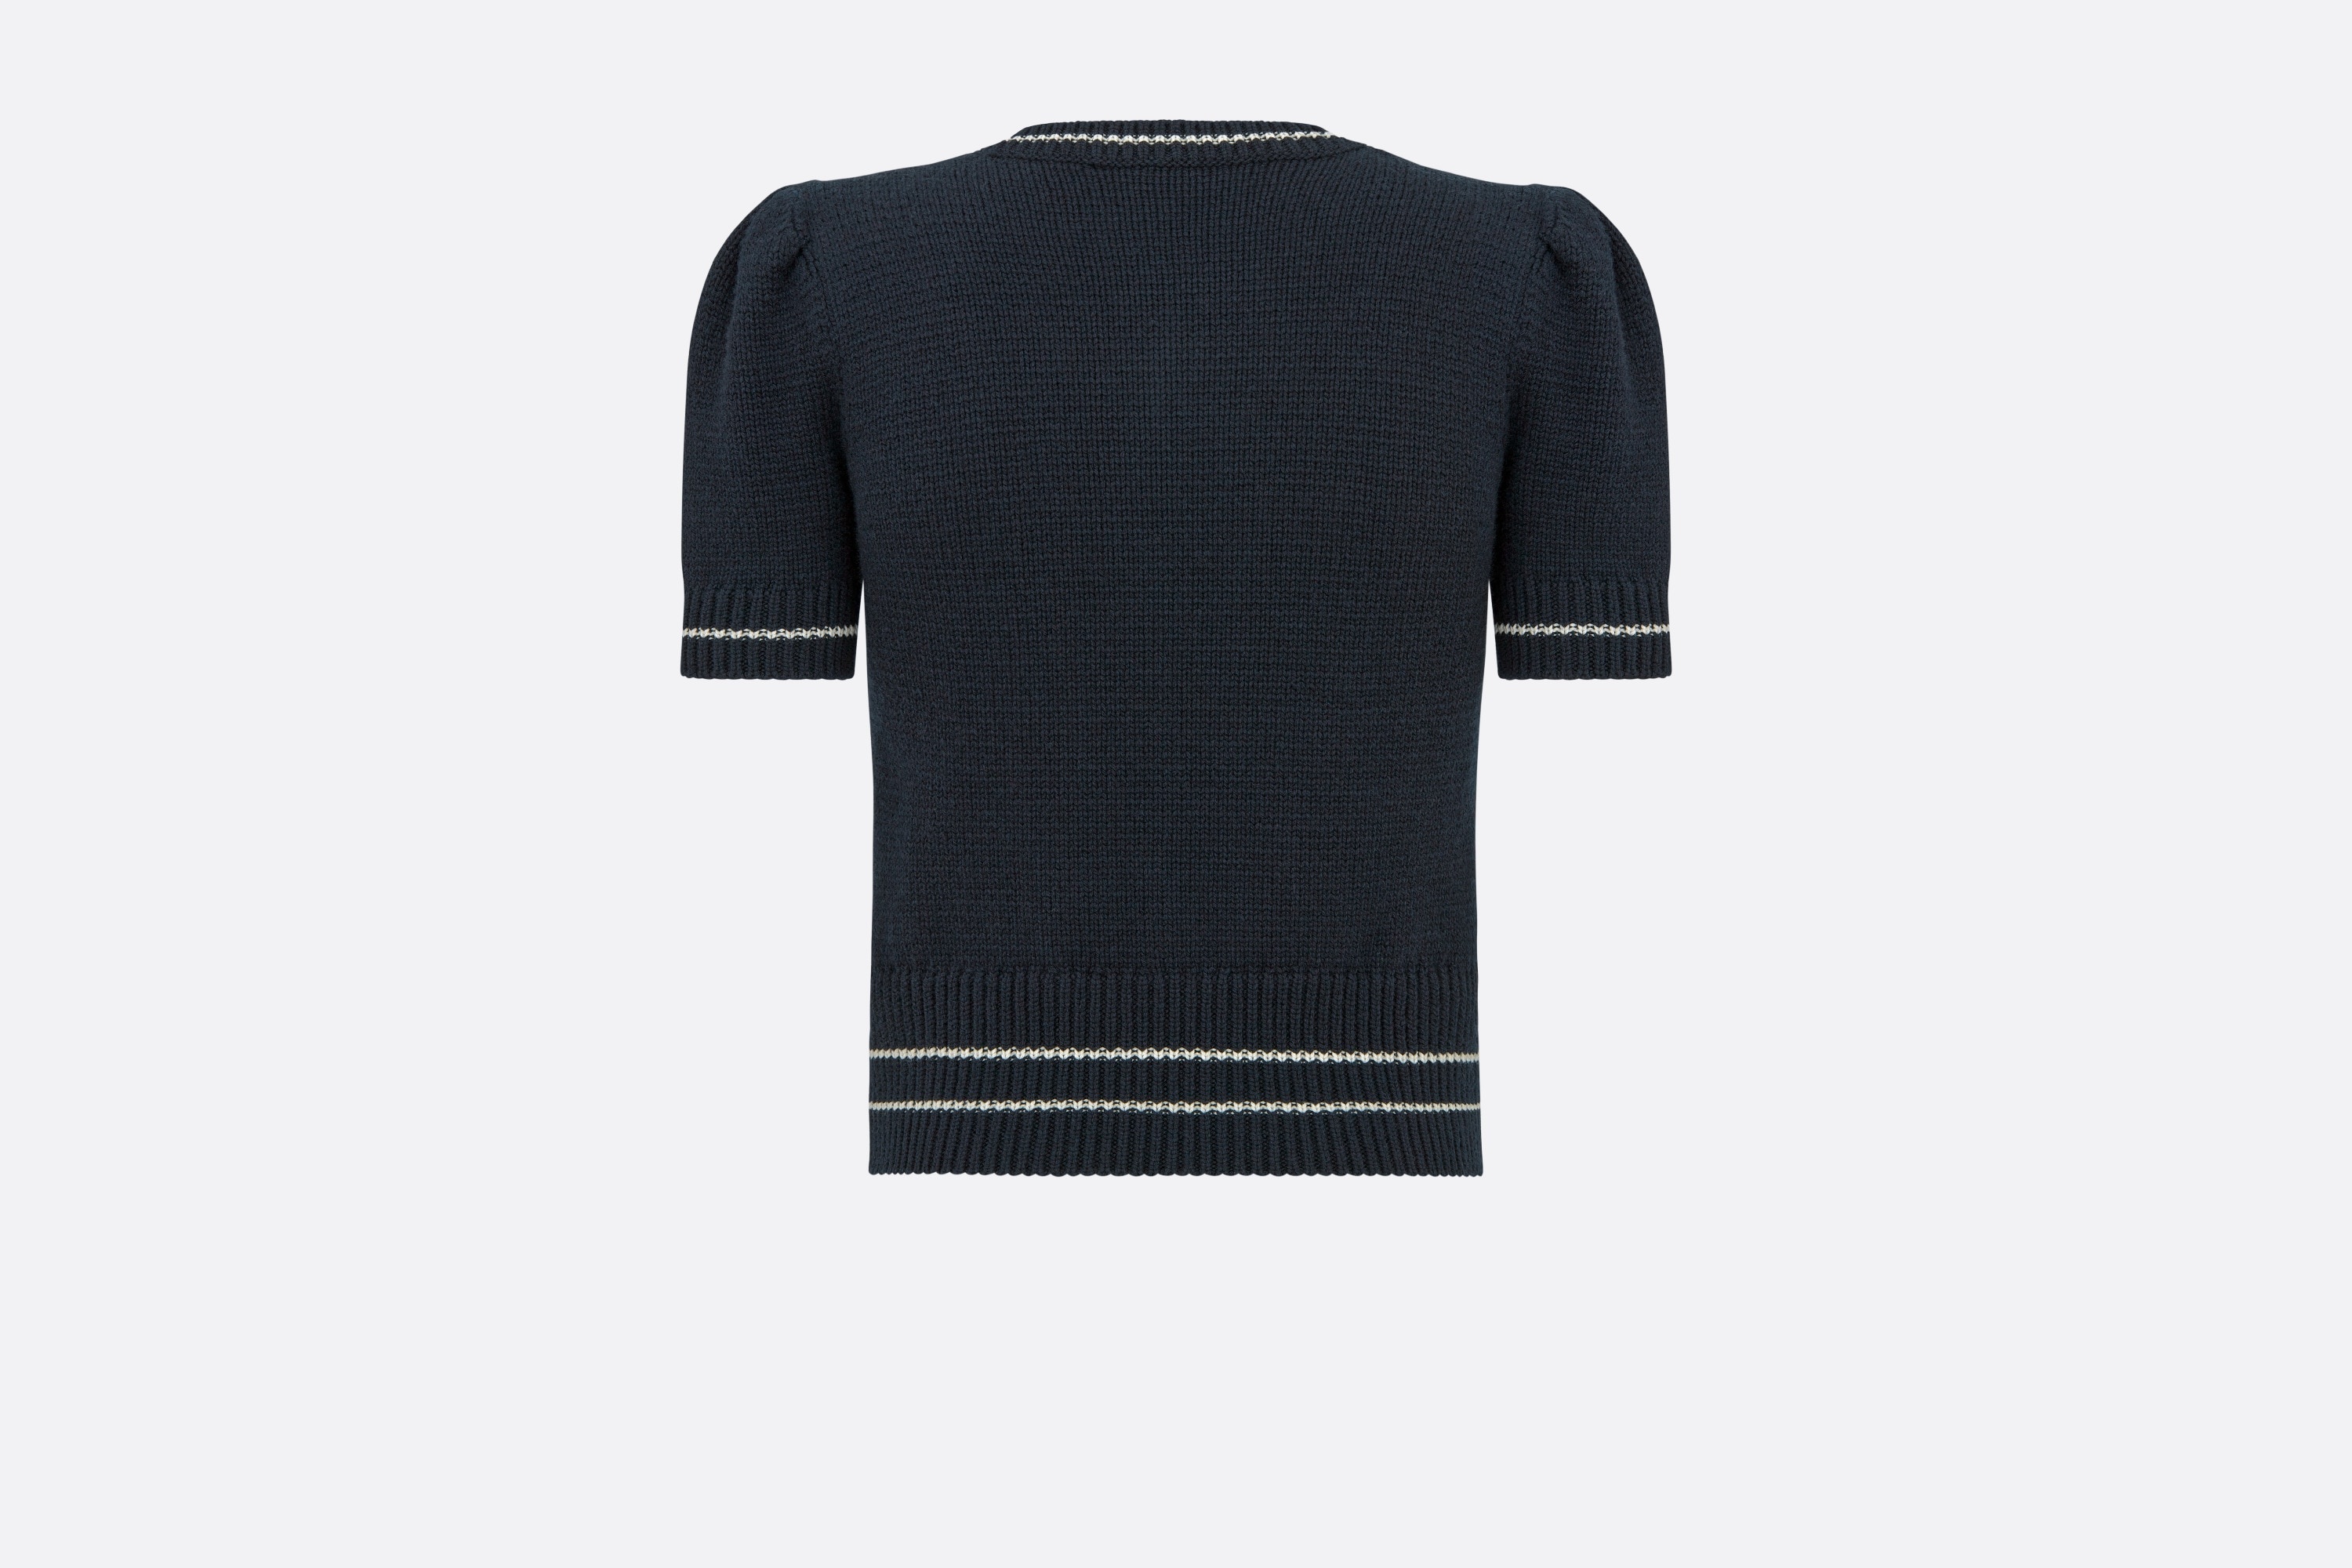 'CHRISTIAN DIOR' Short-Sleeved Sweater - 2